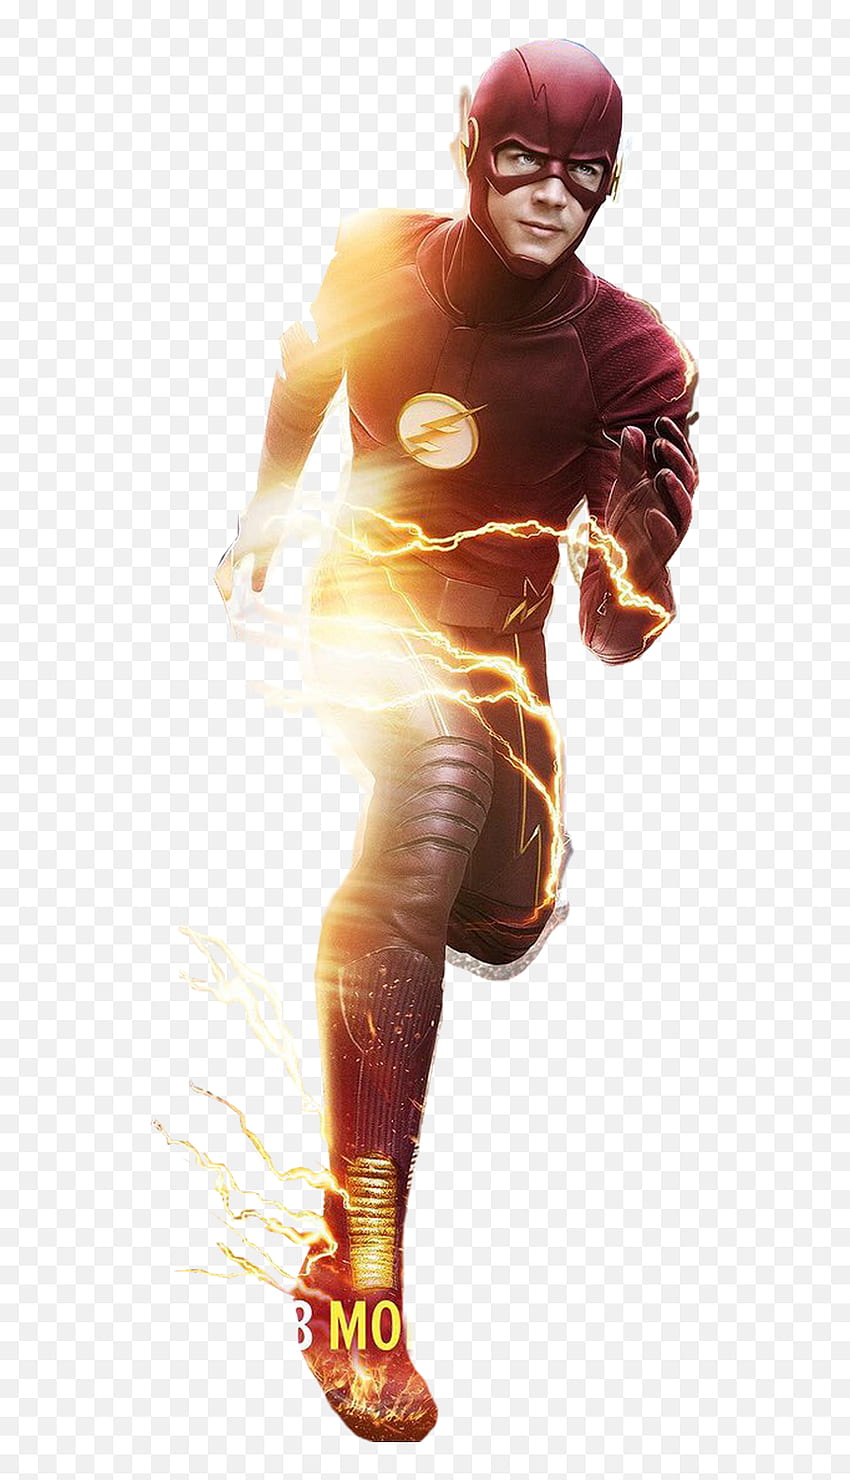 Best Flashlight Transparent - Supergirl And The Flash Png, The Flash Logo - transparent png HD phone wallpaper